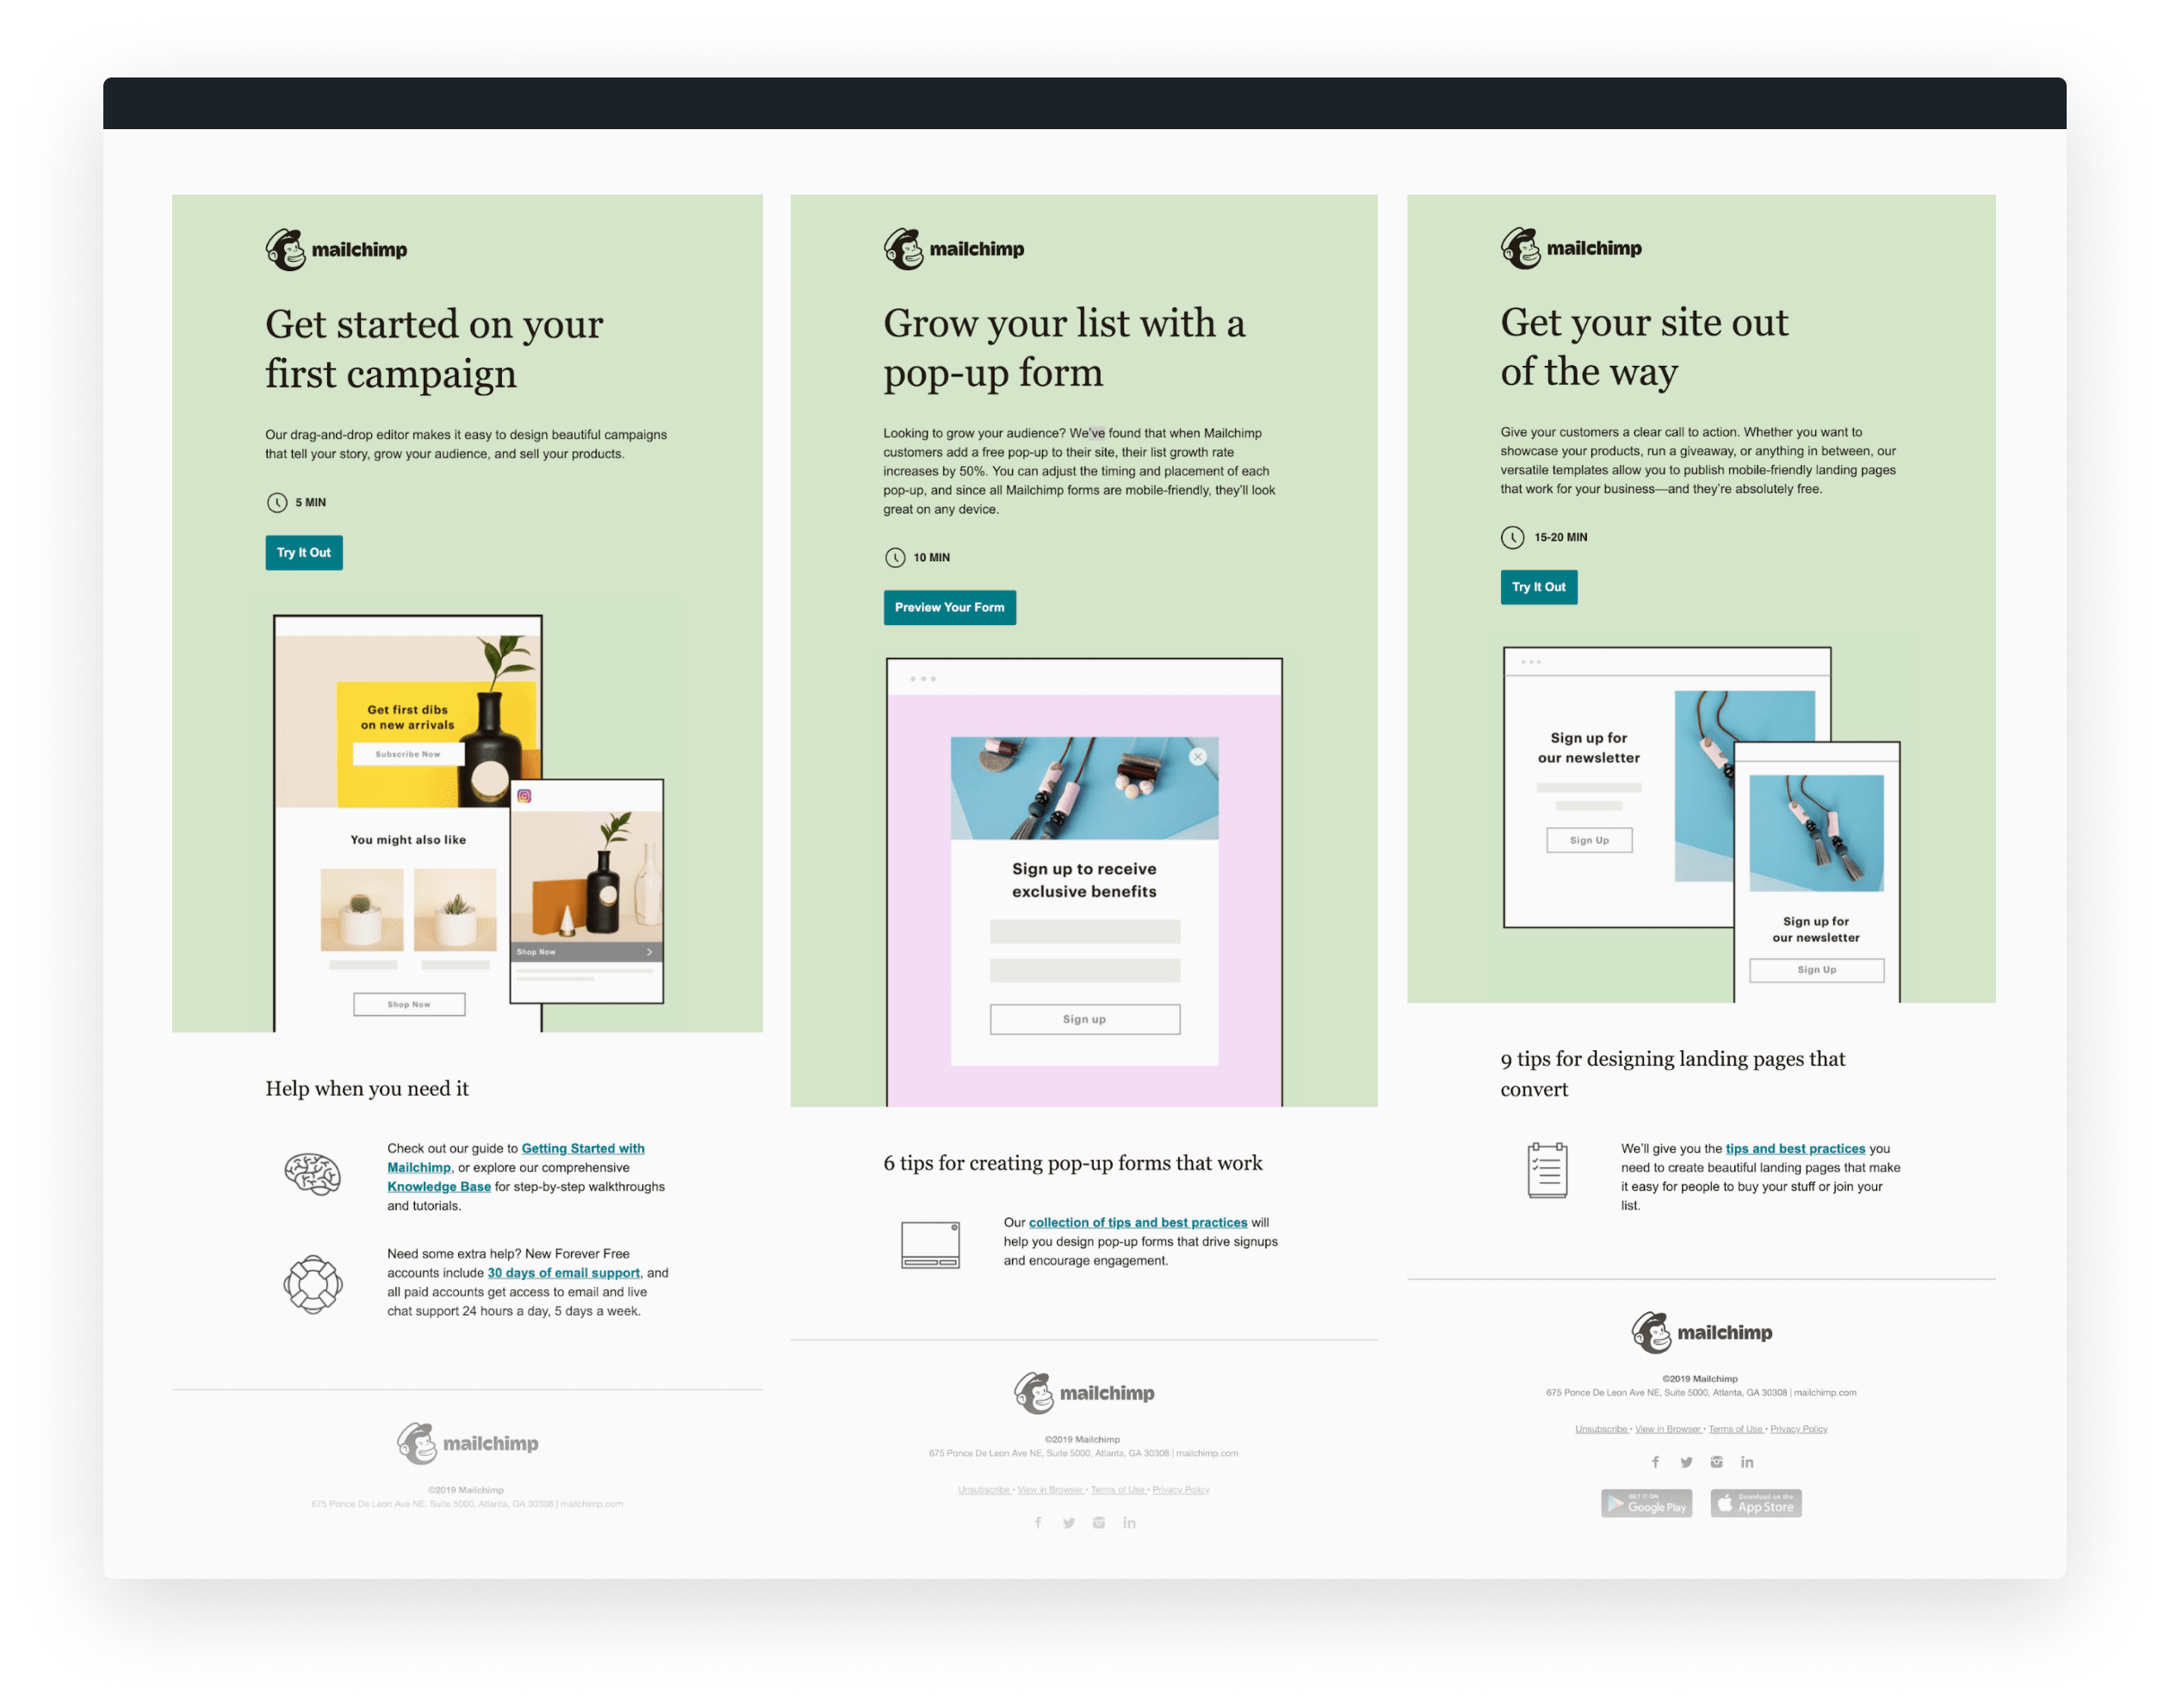 Just a few of the emails in Mailchimp’s updated onboarding program.